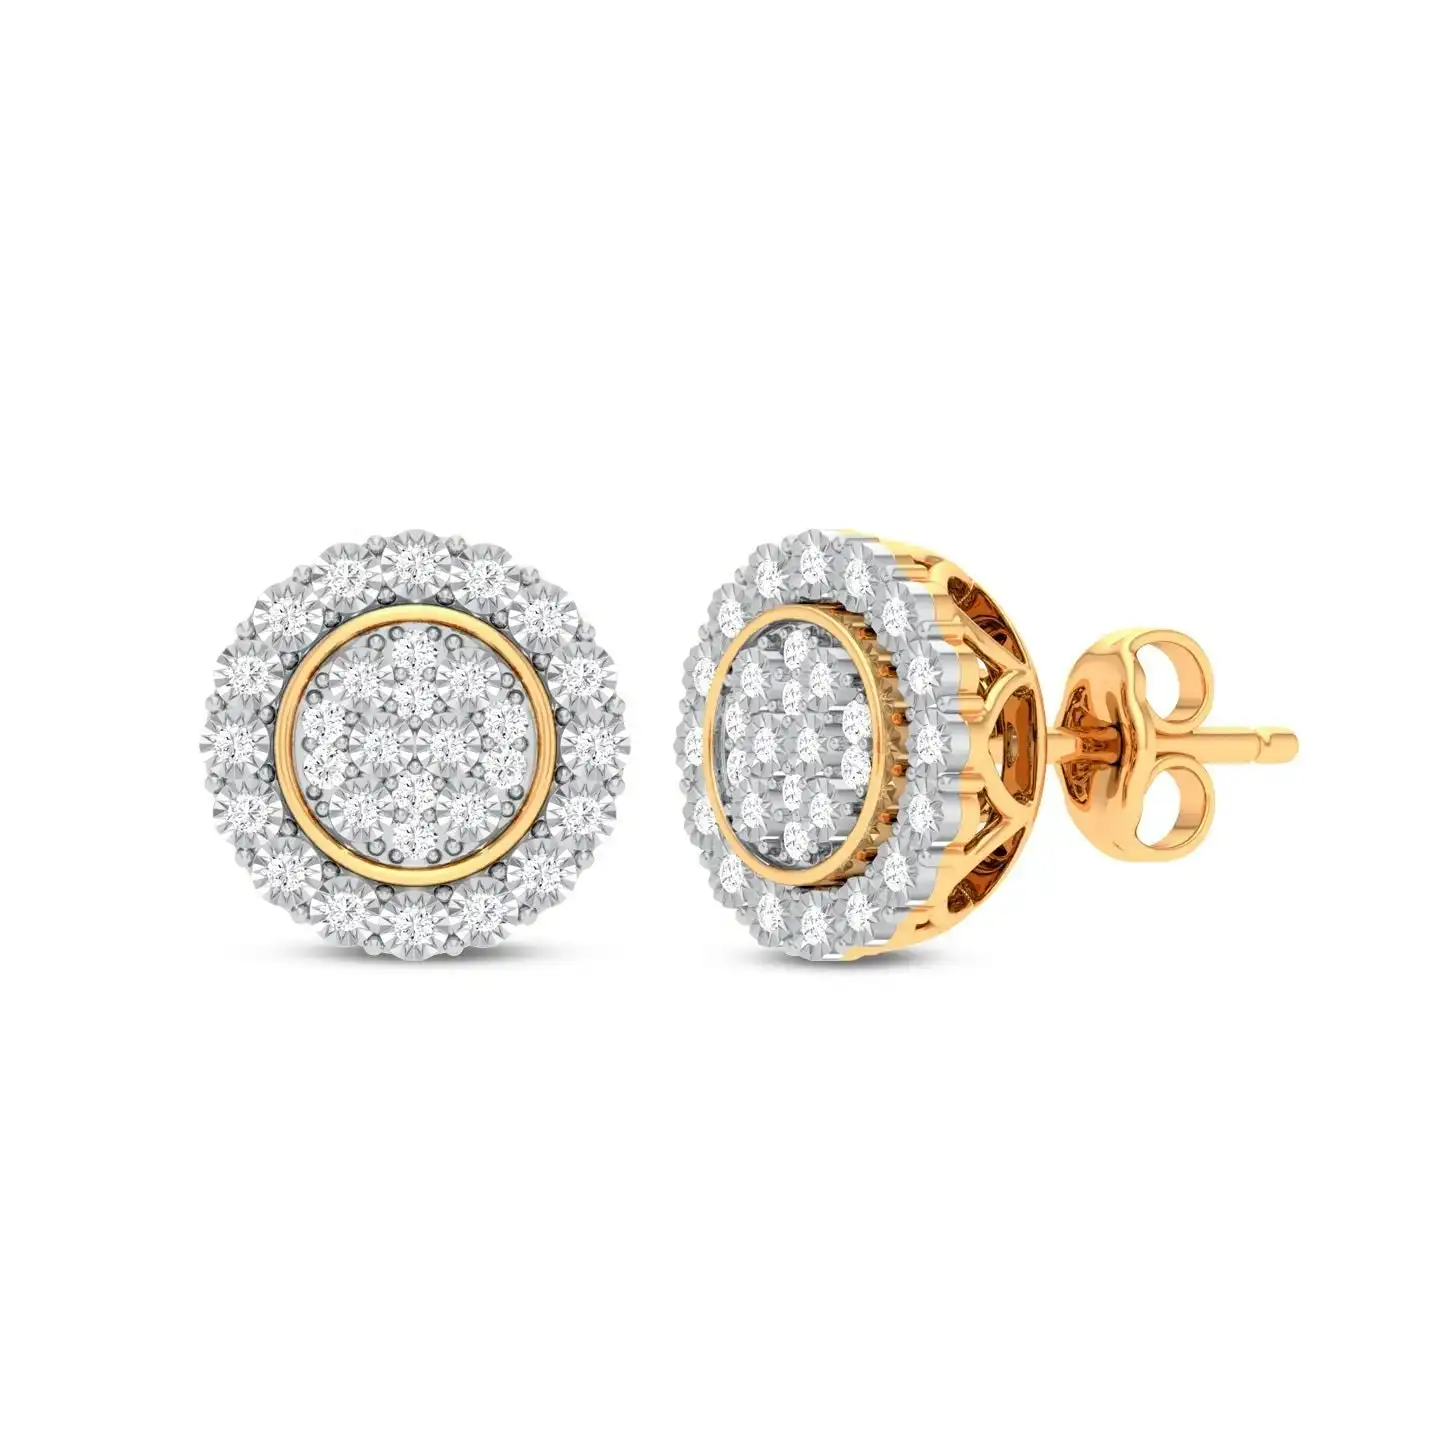 Meera Miracle Halo Earrings with 1/5ct of Laboratory Grown Diamonds in 9ct Yellow Gold